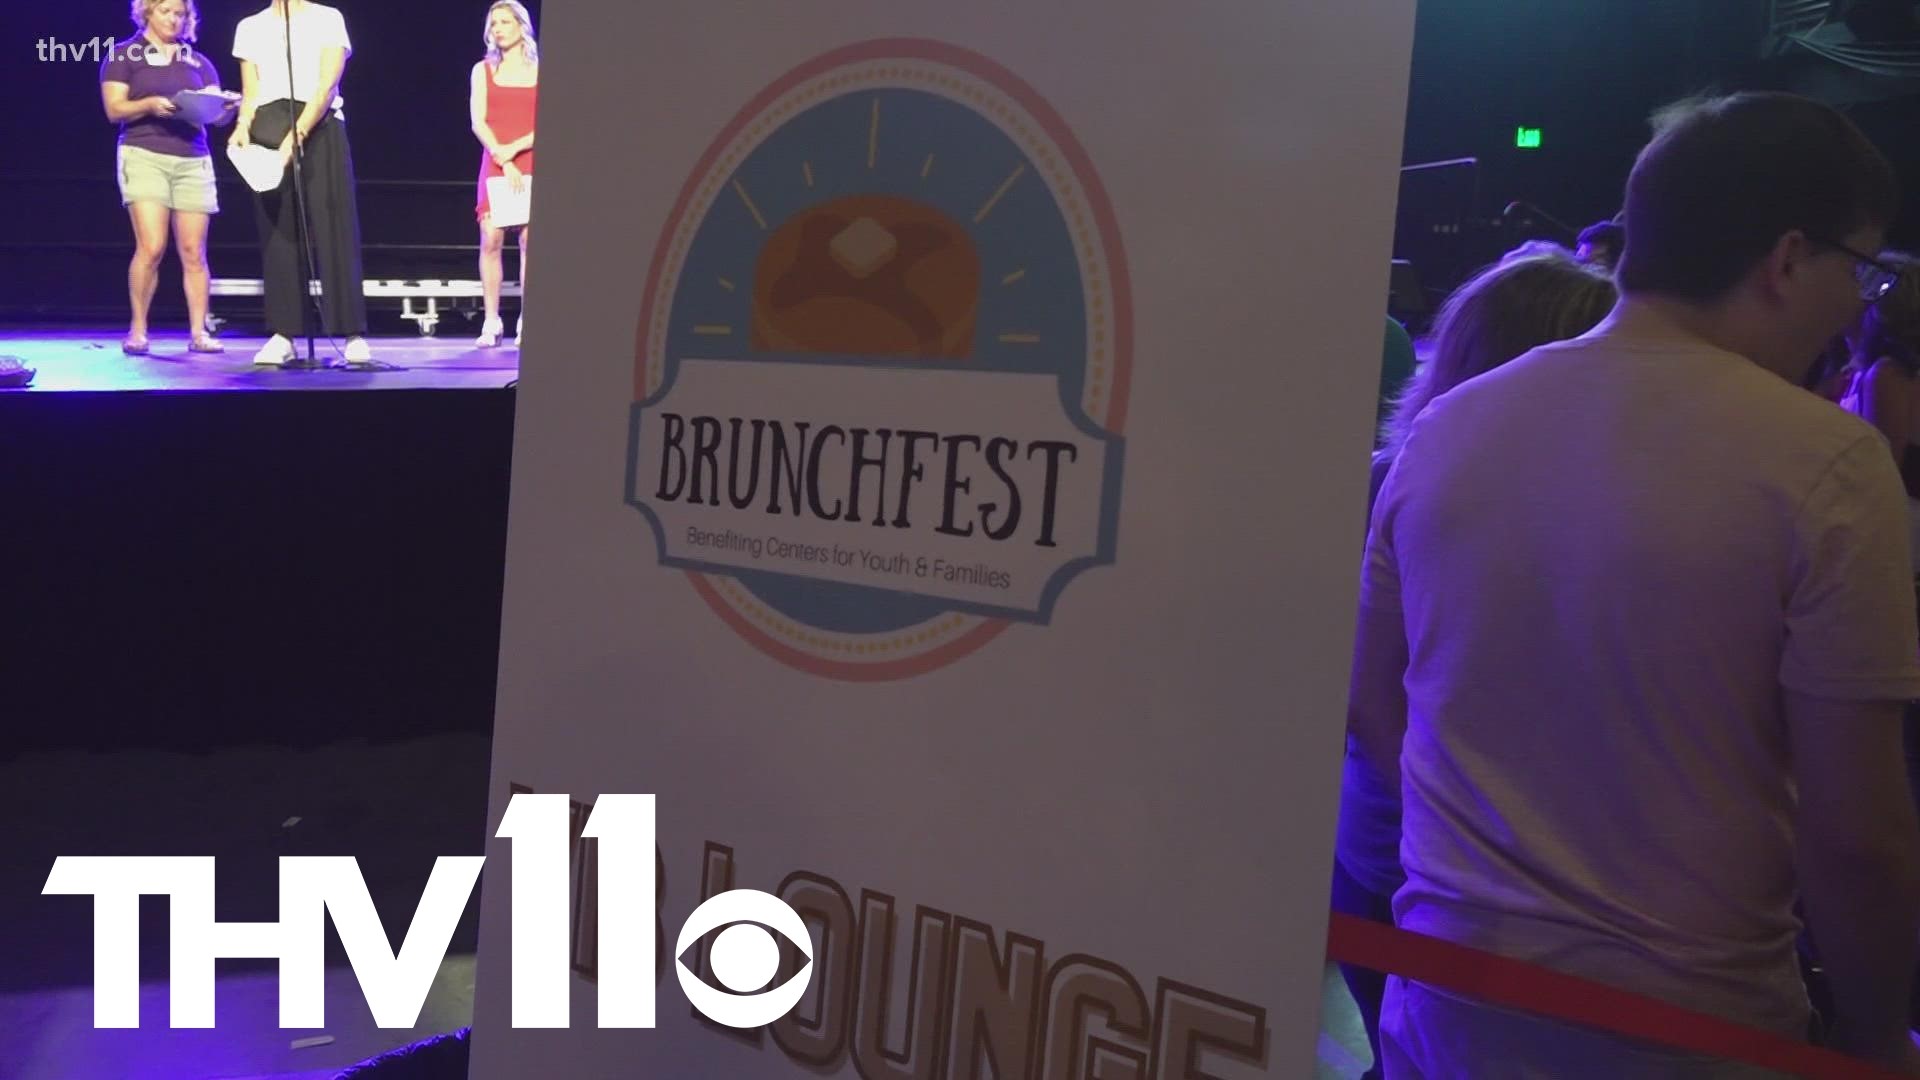 Brunchfest is one of the biggest events for a group of Arkansas young professionals that raise money to give back to local communities.